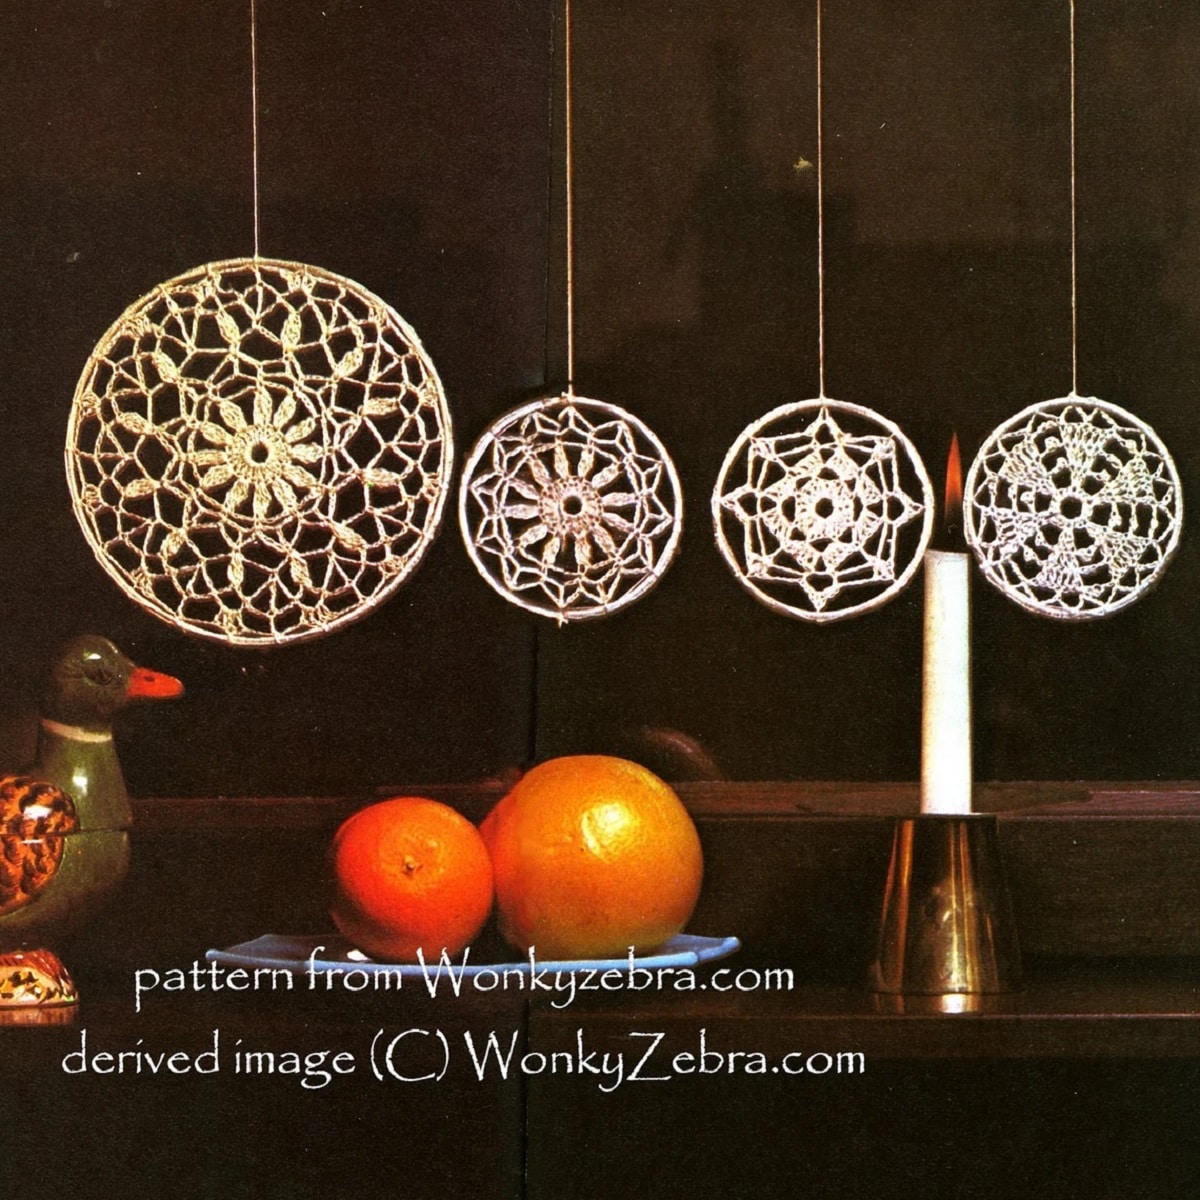 Four white hanging crochet circles with a snowflake in the center. Each circle has a different snowflake above a plate of oranges.